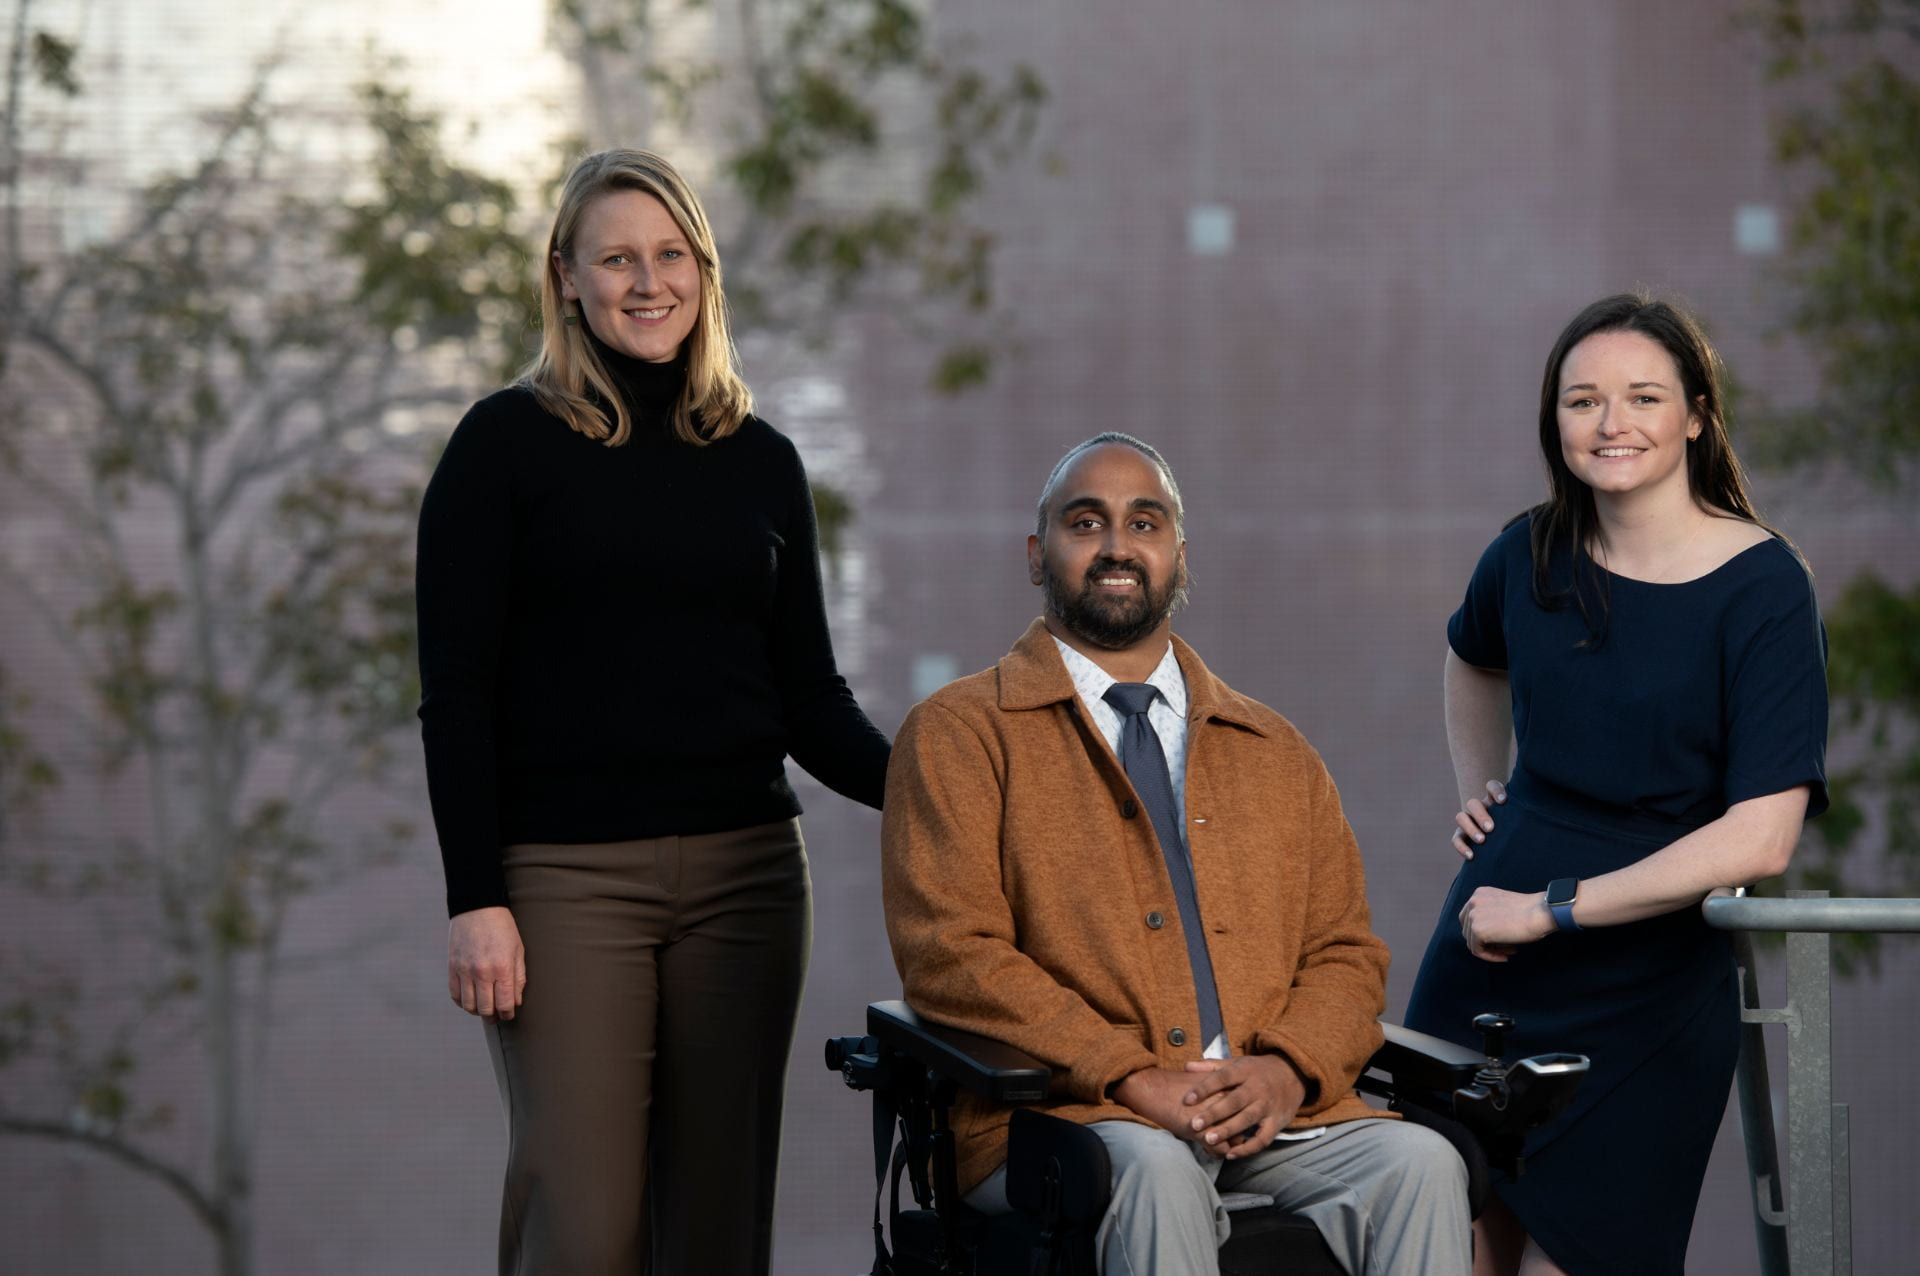 Graduating UCI medical students Anna Rasmussen, Hinesh Patel and Kate Boudreau (from left).